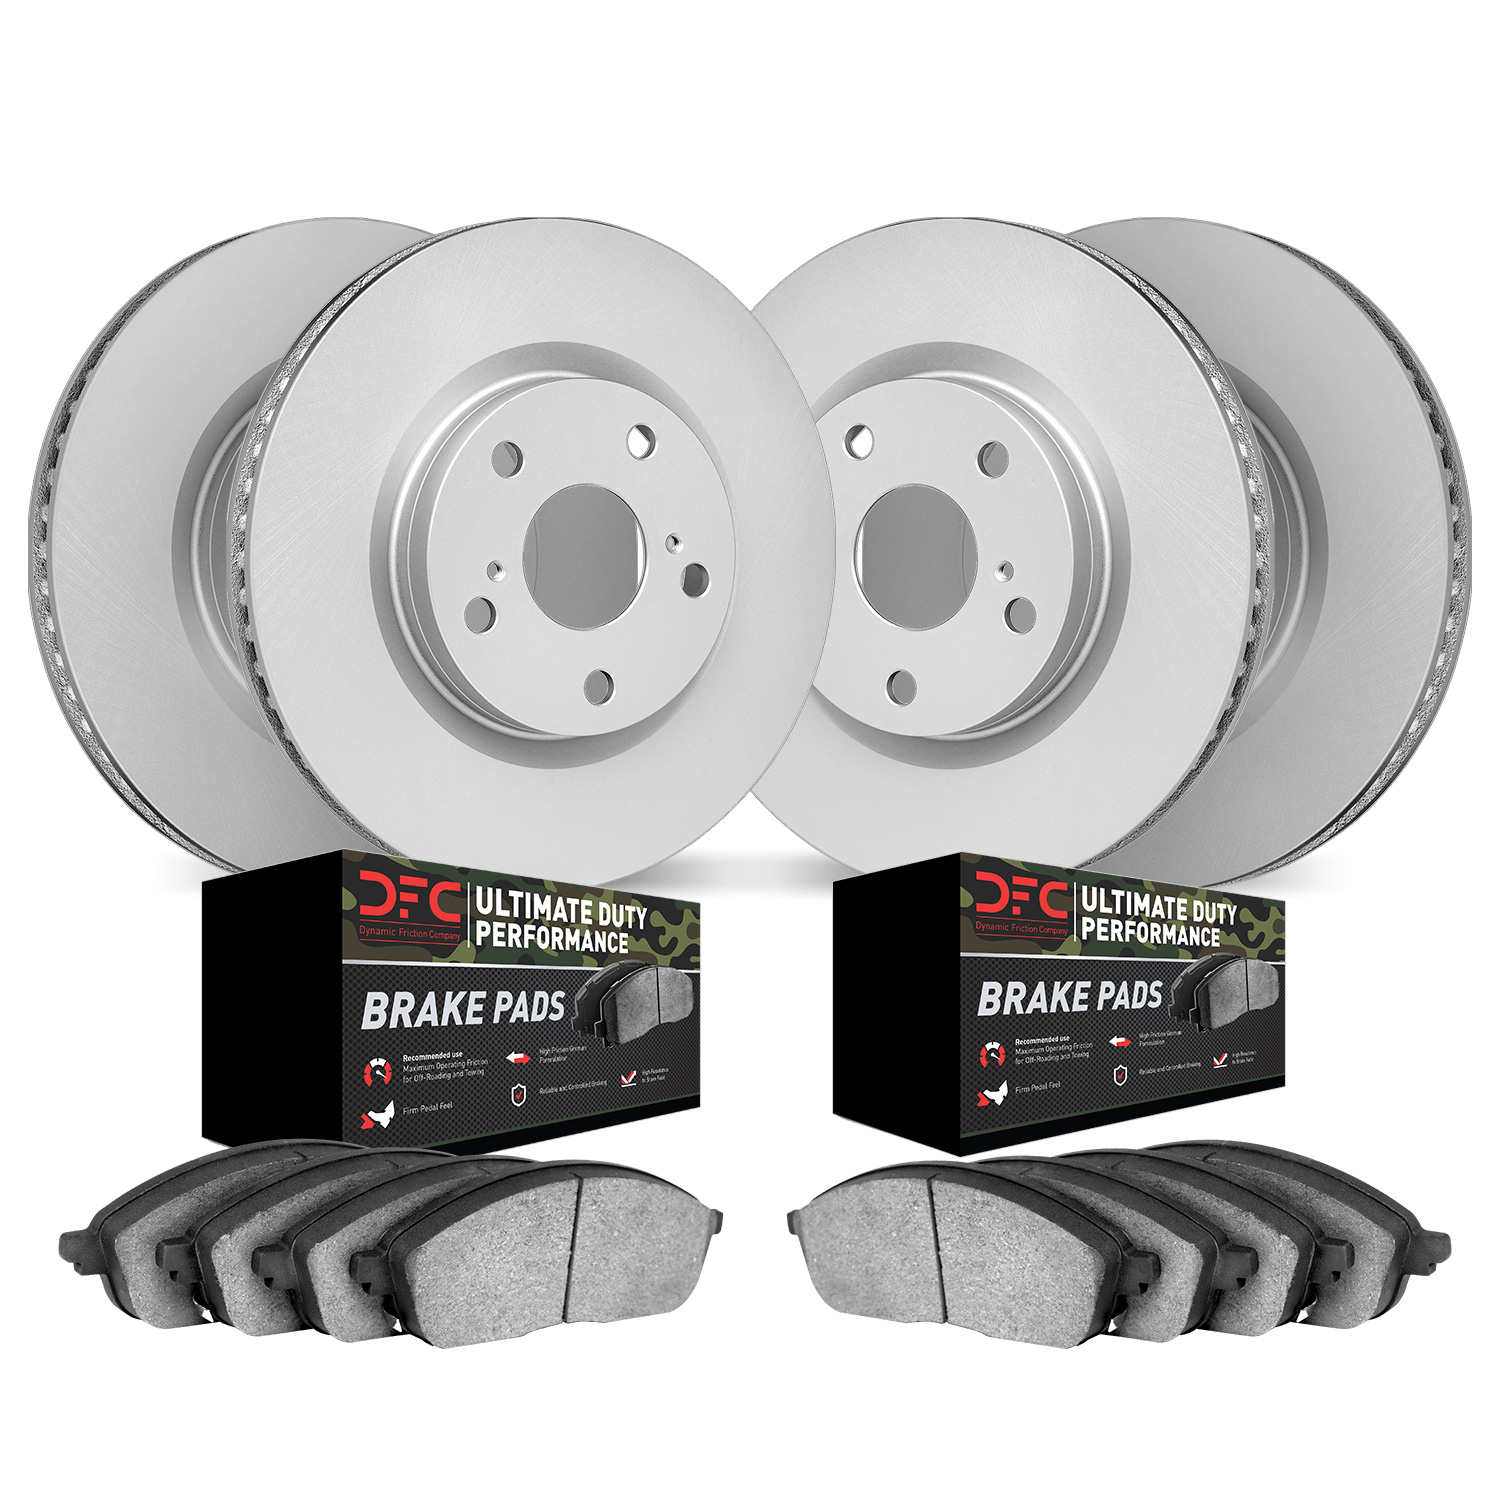 4404-76007 Geospec Brake Rotors with Ultimate-Duty Brake Pads Kit, 2008-2021 Lexus/Toyota/Scion, Position: Front and Rear